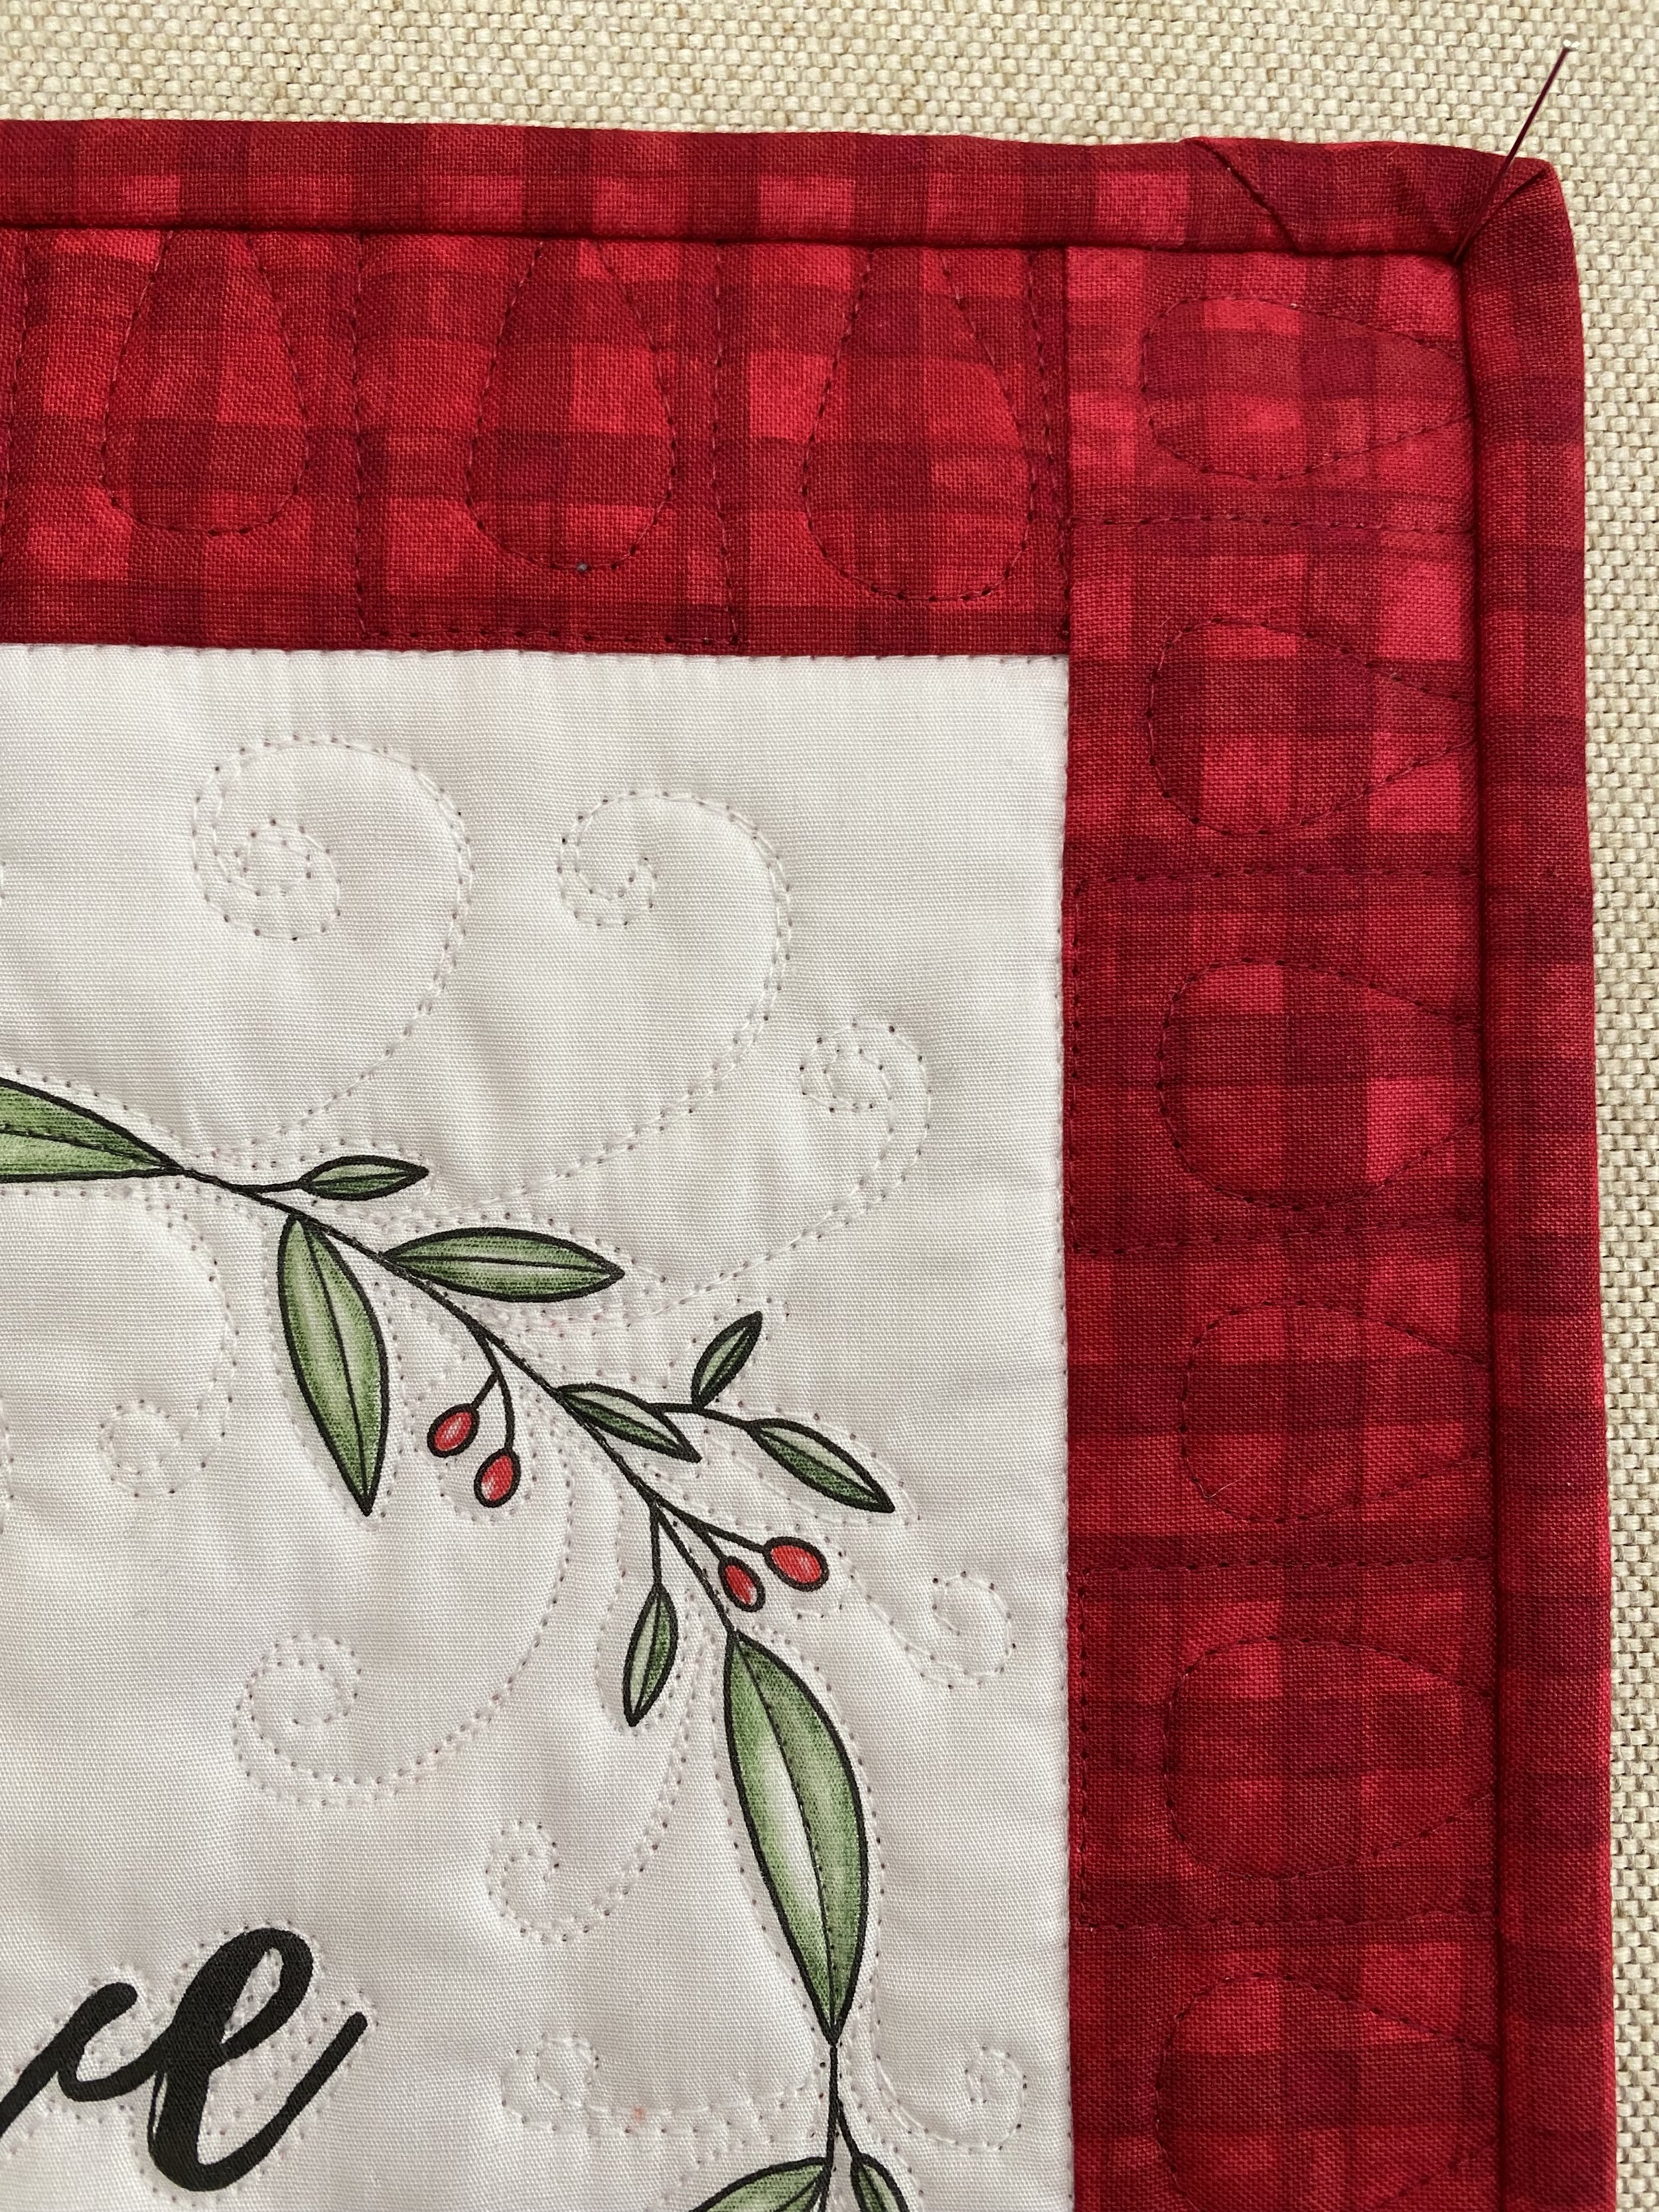 Sew Frosty Pre-Printed mini quilts ready to color by Lauretta Crites